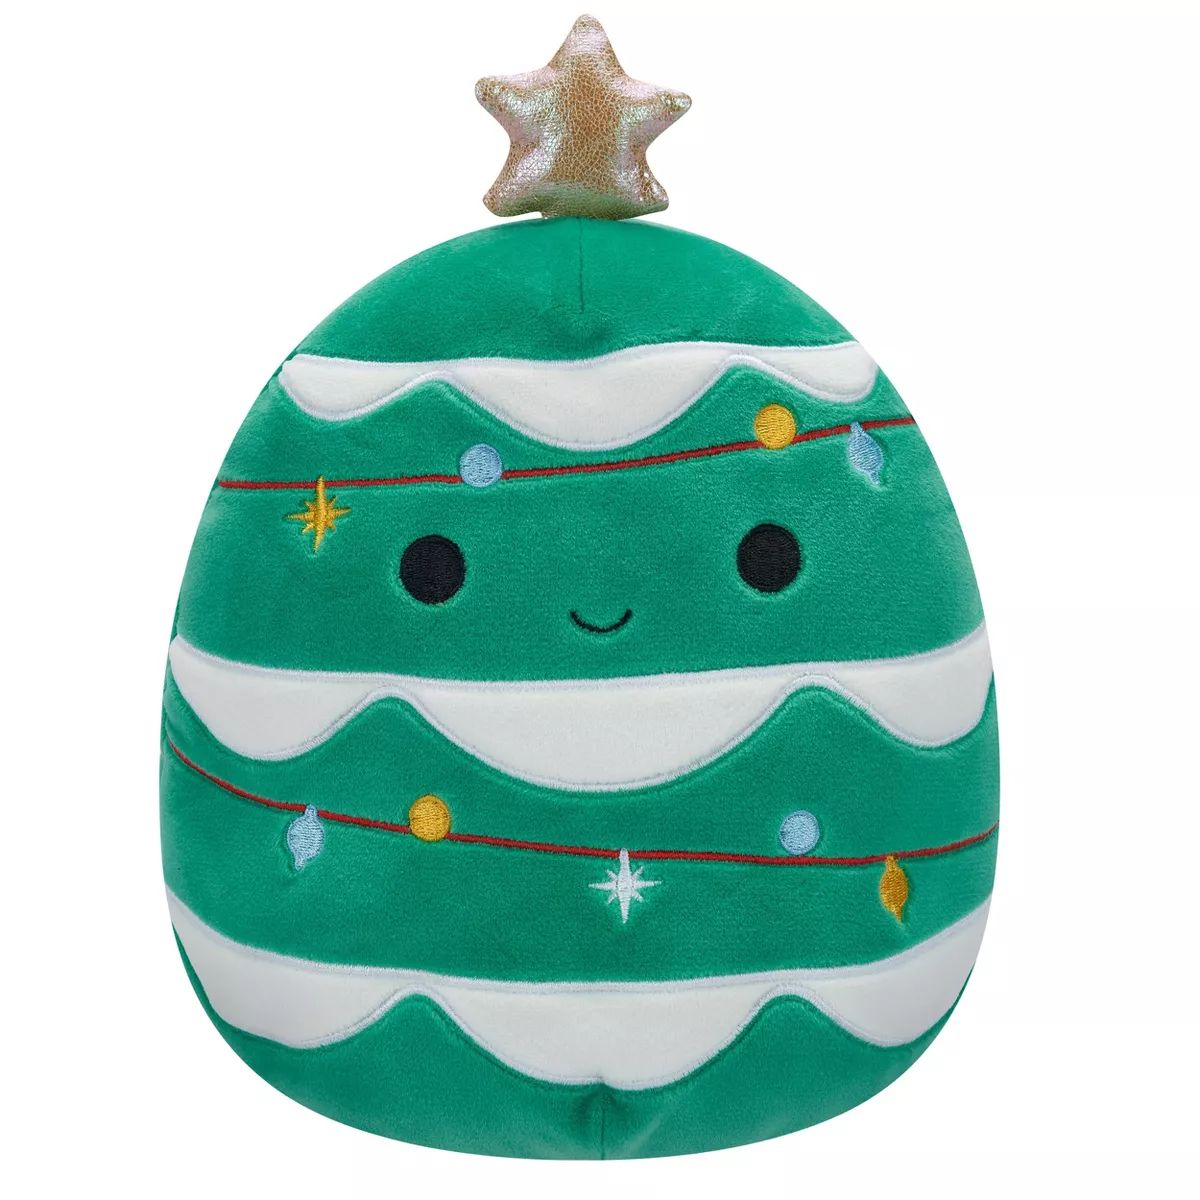 Squishmallows 8" Christmas Tree with Snow Little Plush | Target